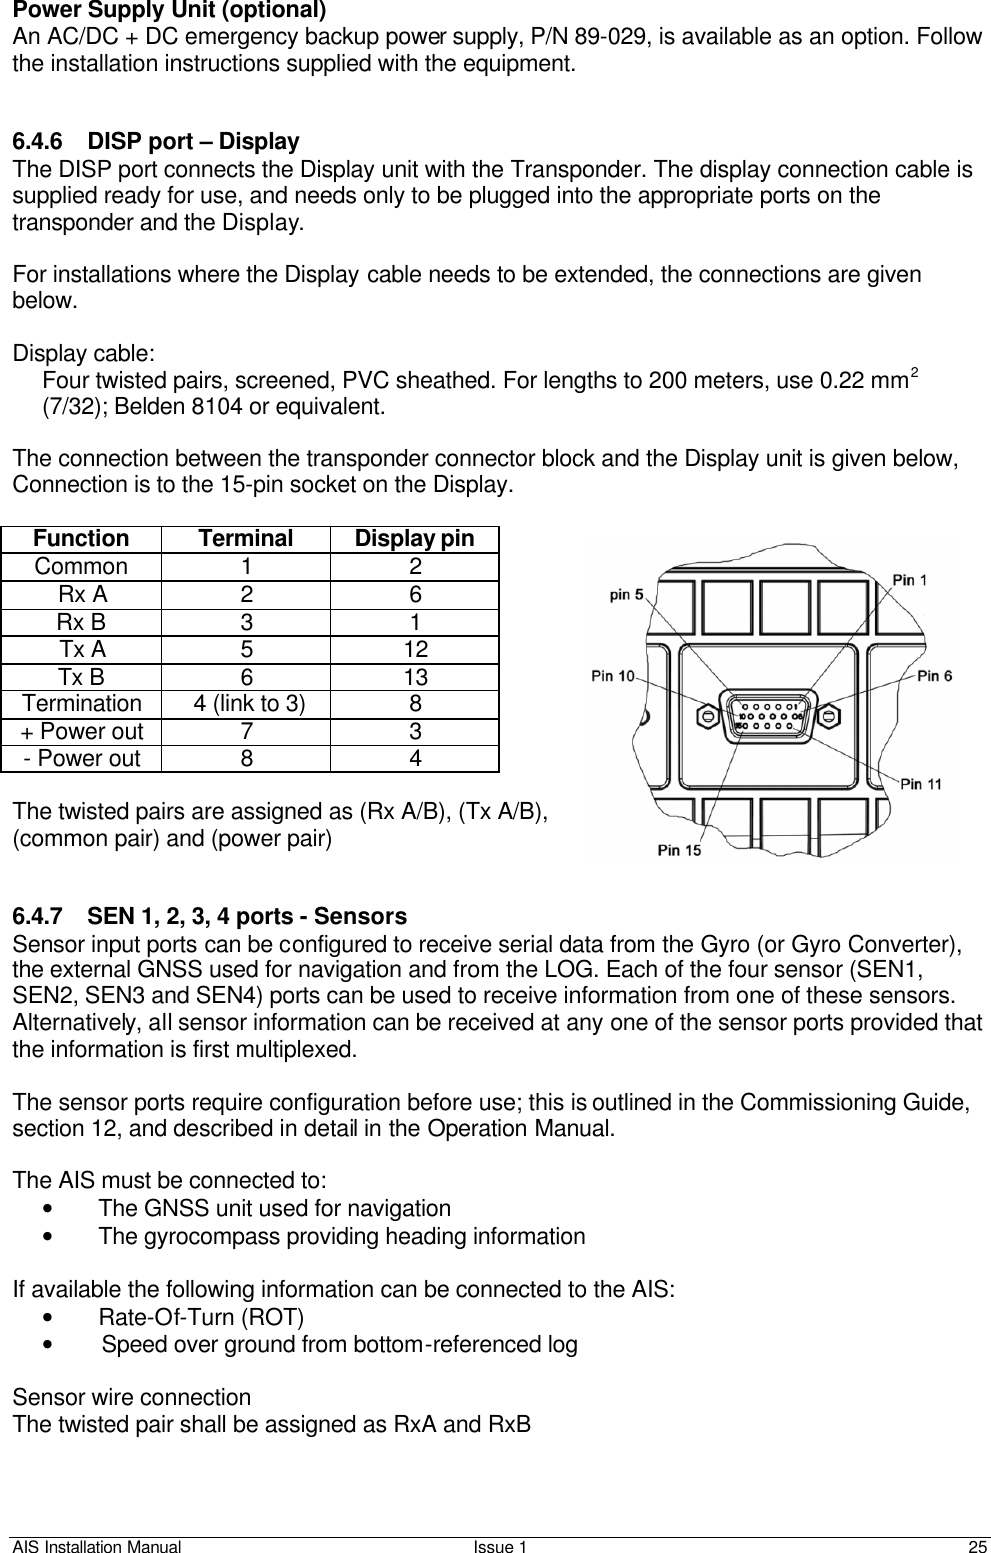 AIS Installation Manual Issue 1 25     Power Supply Unit (optional) An AC/DC + DC emergency backup power supply, P/N 89-029, is available as an option. Follow the installation instructions supplied with the equipment.   6.4.6 DISP port – Display The DISP port connects the Display unit with the Transponder. The display connection cable is supplied ready for use, and needs only to be plugged into the appropriate ports on the transponder and the Display.   For installations where the Display cable needs to be extended, the connections are given below.   Display cable: Four twisted pairs, screened, PVC sheathed. For lengths to 200 meters, use 0.22 mm2 (7/32); Belden 8104 or equivalent.  The connection between the transponder connector block and the Display unit is given below,  Connection is to the 15-pin socket on the Display.  Function Terminal Display pin Common 1 2 Rx A 2 6 Rx B 3 1 Tx A 5 12 Tx B 6 13 Termination  4 (link to 3) 8 + Power out 7 3 - Power out 8 4  The twisted pairs are assigned as (Rx A/B), (Tx A/B), (common pair) and (power pair)   6.4.7 SEN 1, 2, 3, 4 ports - Sensors Sensor input ports can be configured to receive serial data from the Gyro (or Gyro Converter), the external GNSS used for navigation and from the LOG. Each of the four sensor (SEN1, SEN2, SEN3 and SEN4) ports can be used to receive information from one of these sensors. Alternatively, all sensor information can be received at any one of the sensor ports provided that the information is first multiplexed.  The sensor ports require configuration before use; this is outlined in the Commissioning Guide, section 12, and described in detail in the Operation Manual.  The AIS must be connected to: • The GNSS unit used for navigation • The gyrocompass providing heading information  If available the following information can be connected to the AIS: • Rate-Of-Turn (ROT)  • Speed over ground from bottom-referenced log  Sensor wire connection The twisted pair shall be assigned as RxA and RxB  